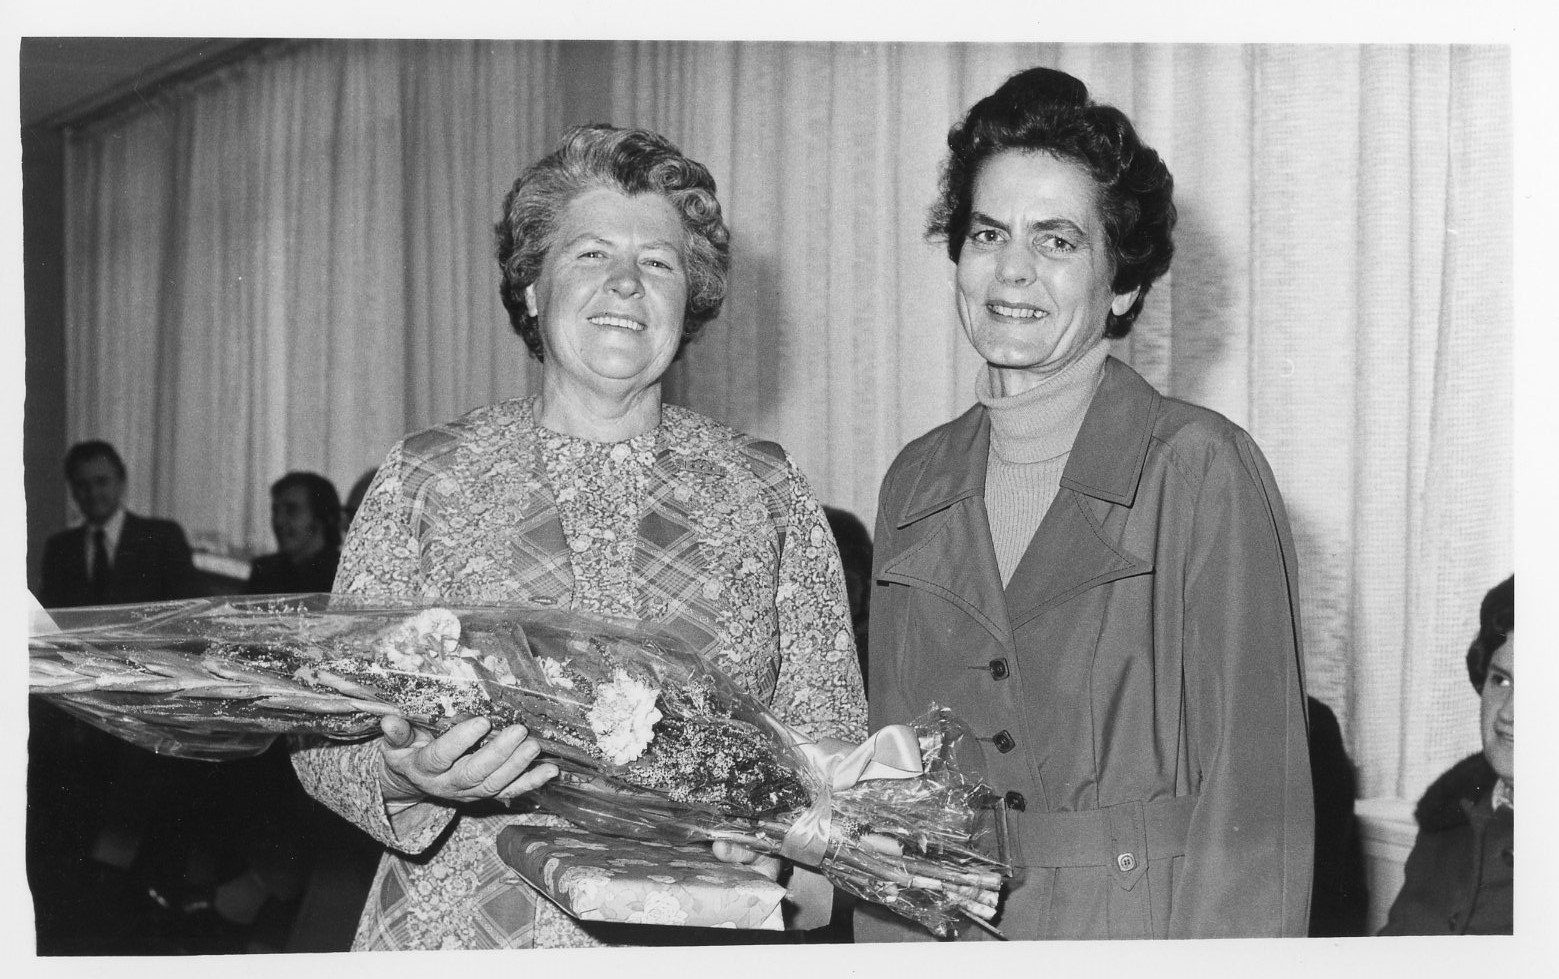 1974 - Farewell To Deaconess Phyllis Bonython With Brenda Waters